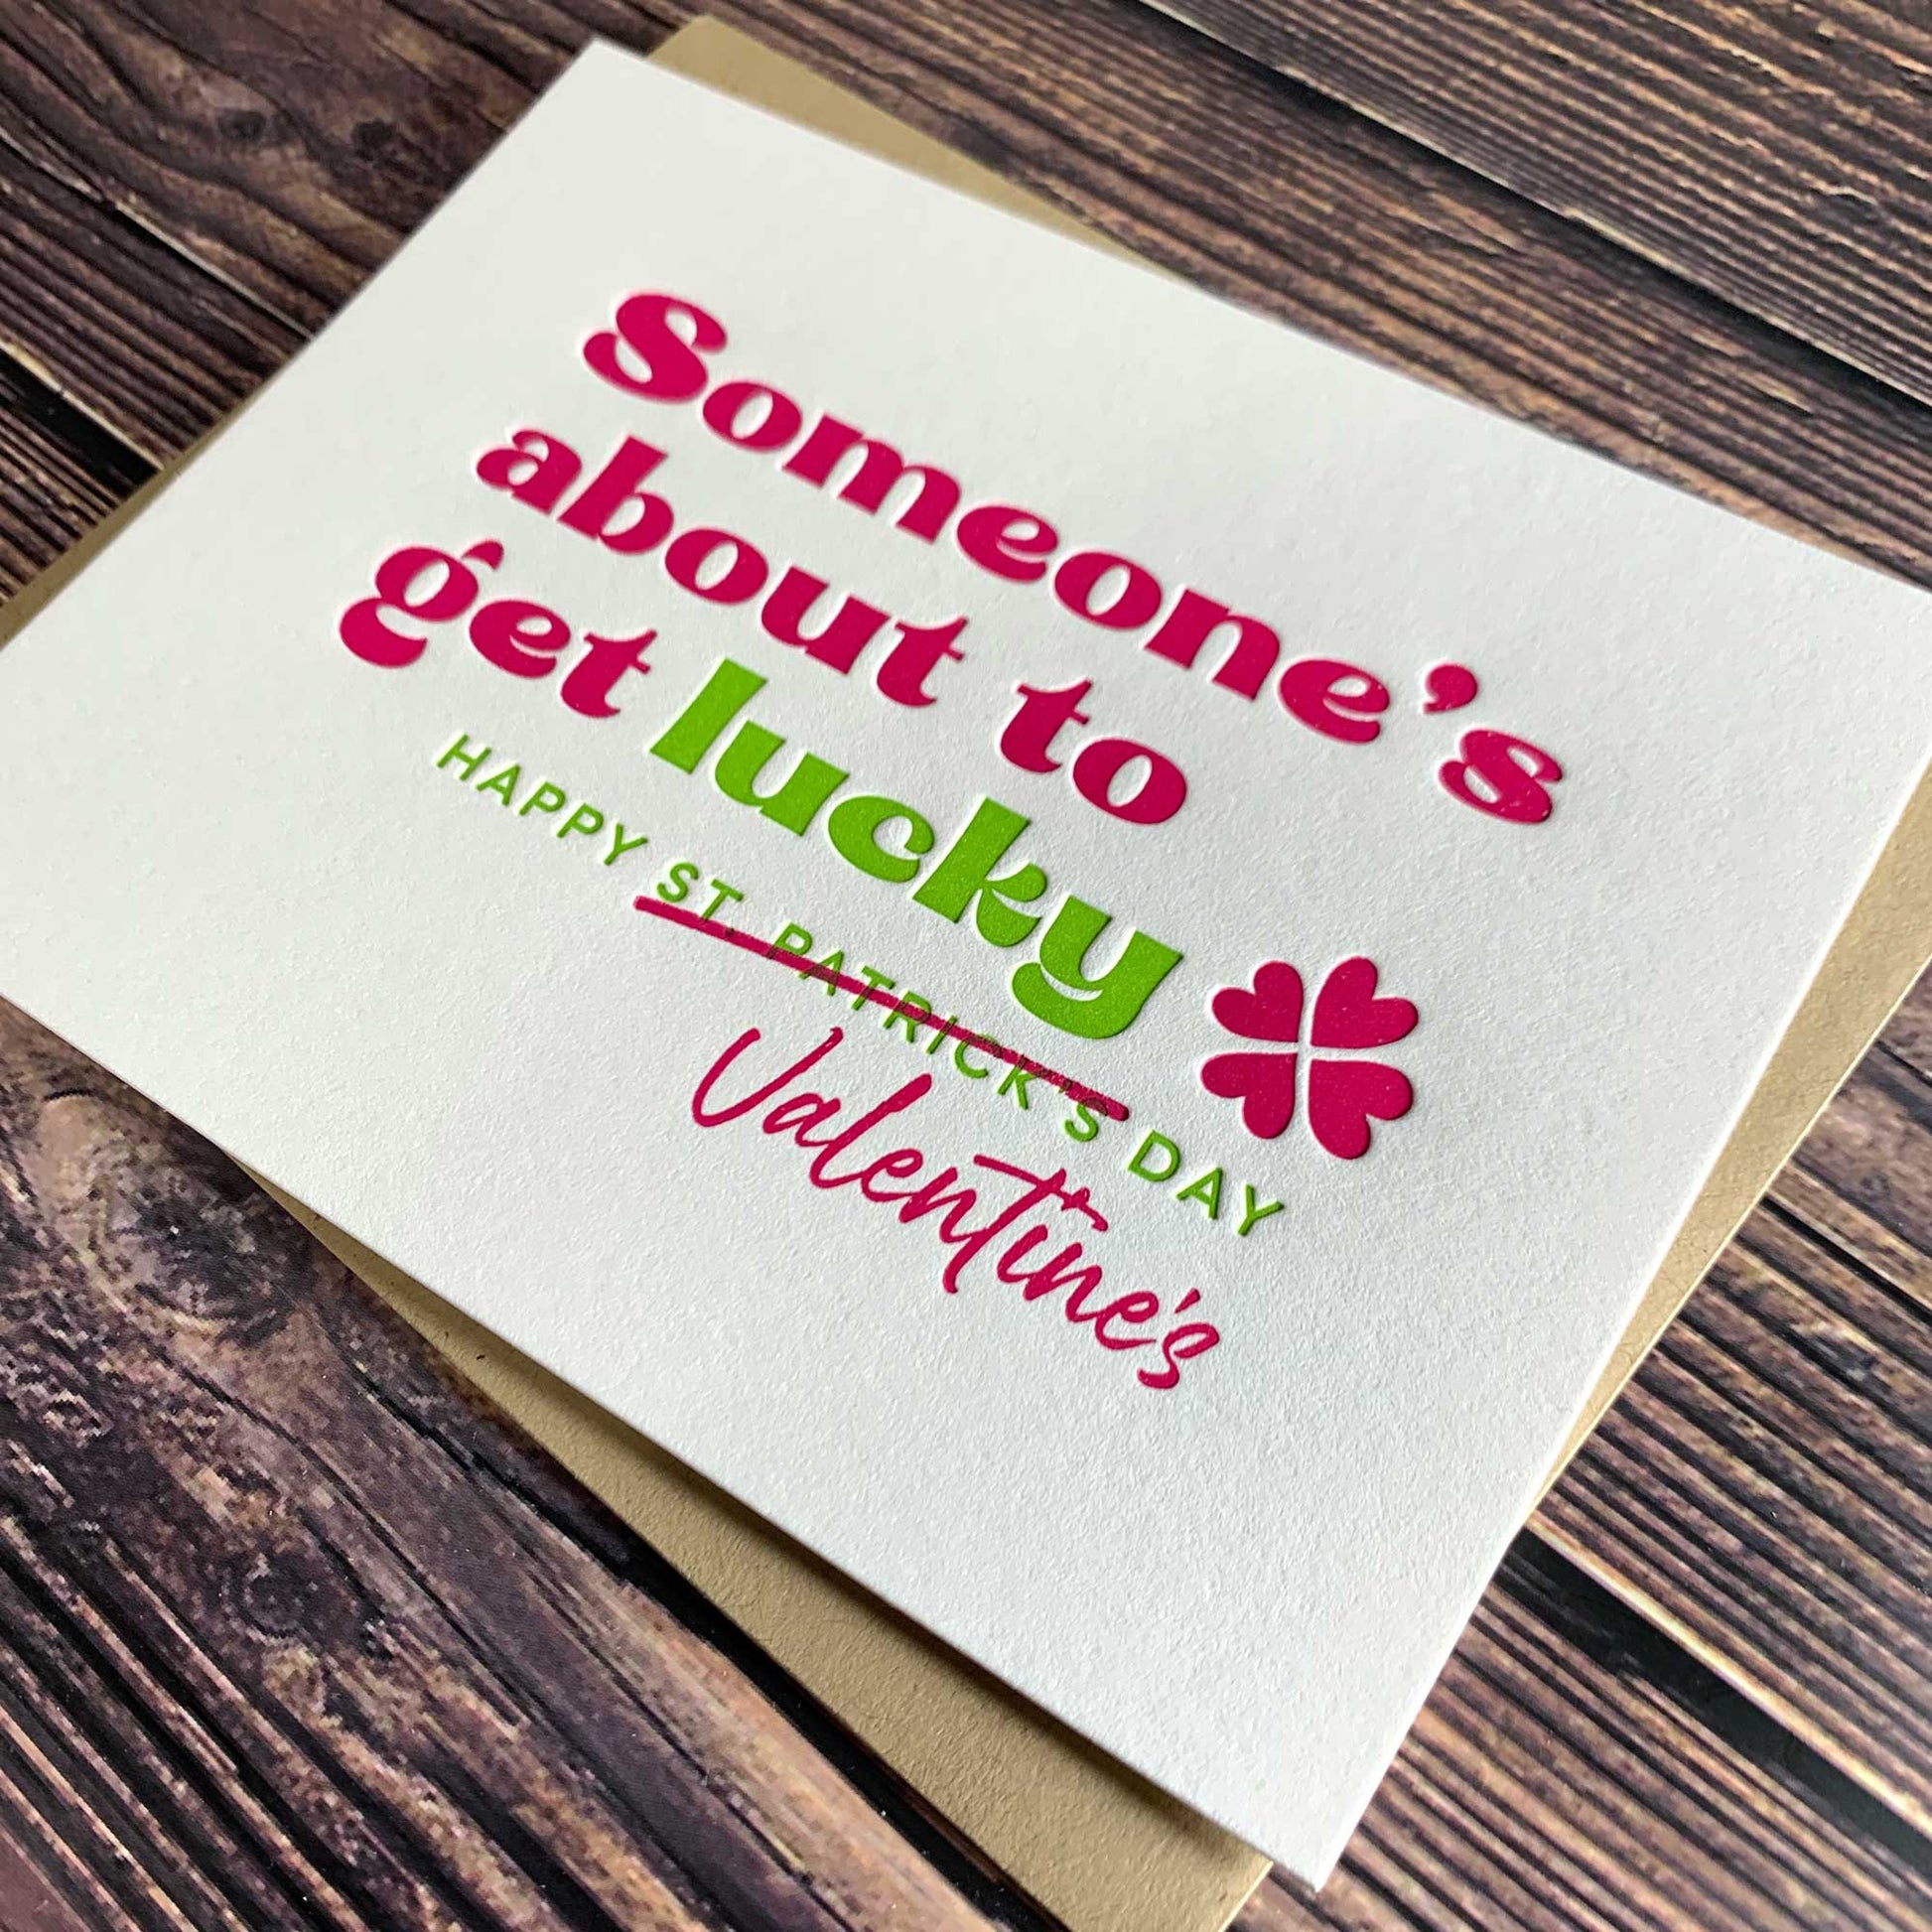 Someone's about to get lucky, Happy Valentine's day (St. Patrick's Day is crossed out), Valentine's Day Card, Letterpress printed, view shows letterpress impression, includes envelope